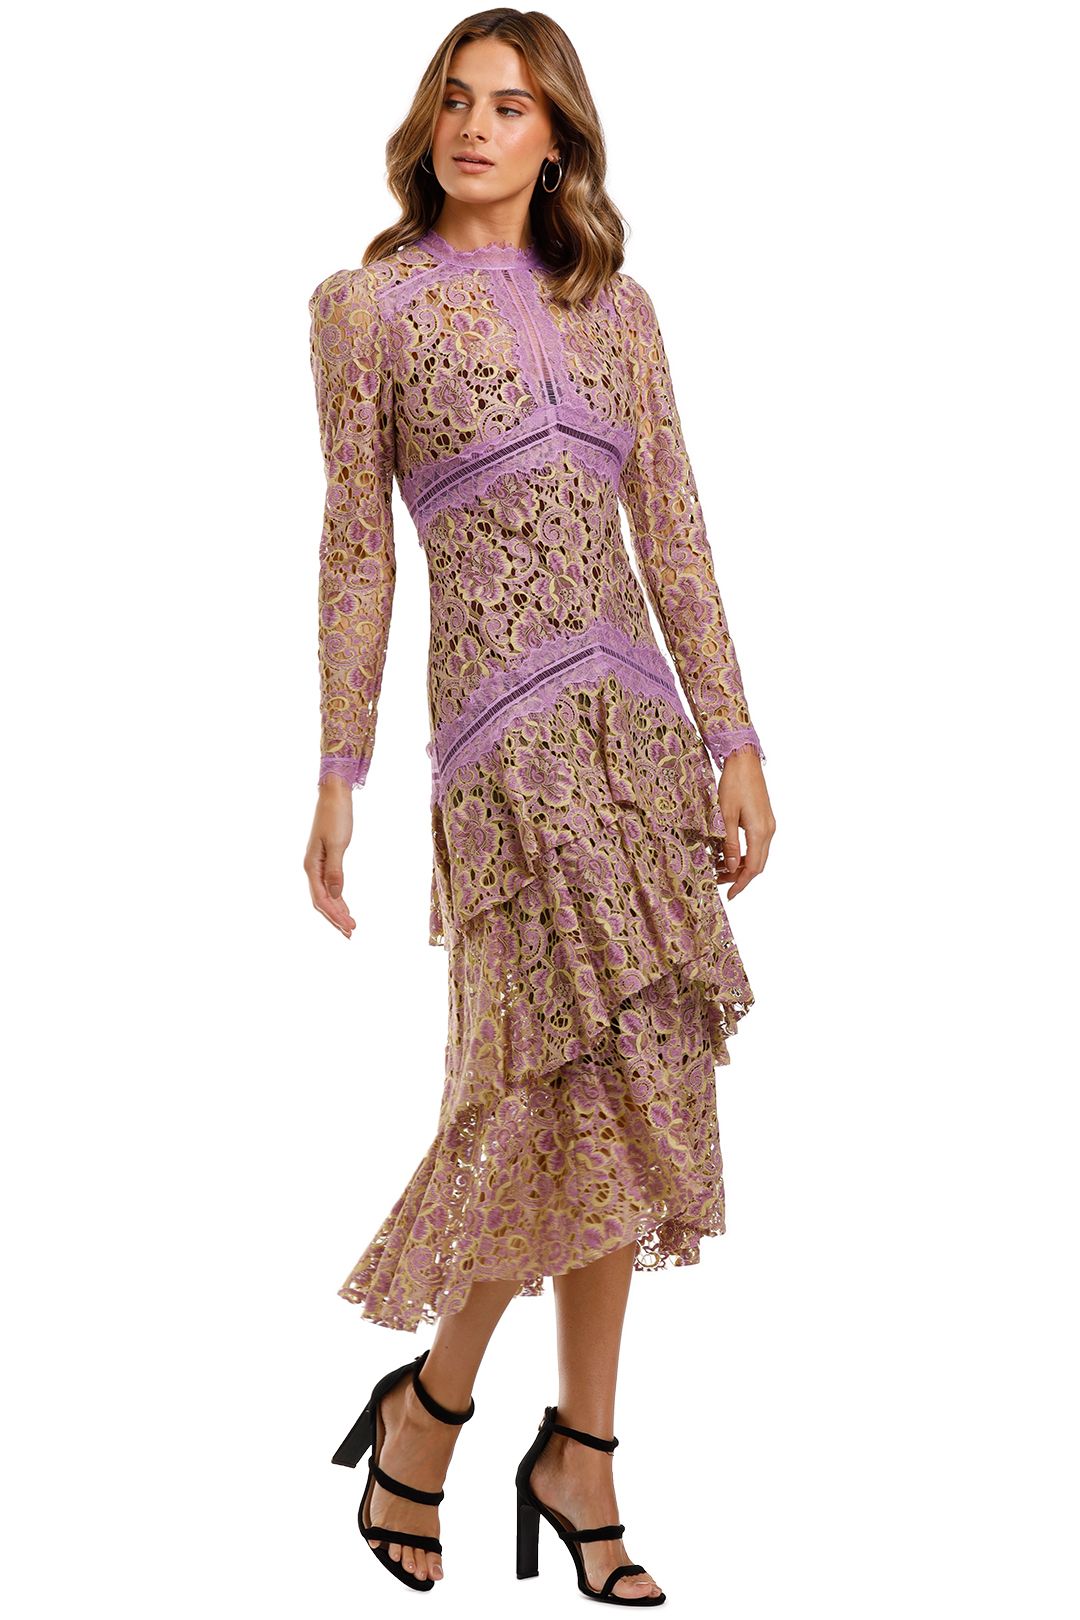 Moss and Spy Amber Tiered Dress lace long sleeve